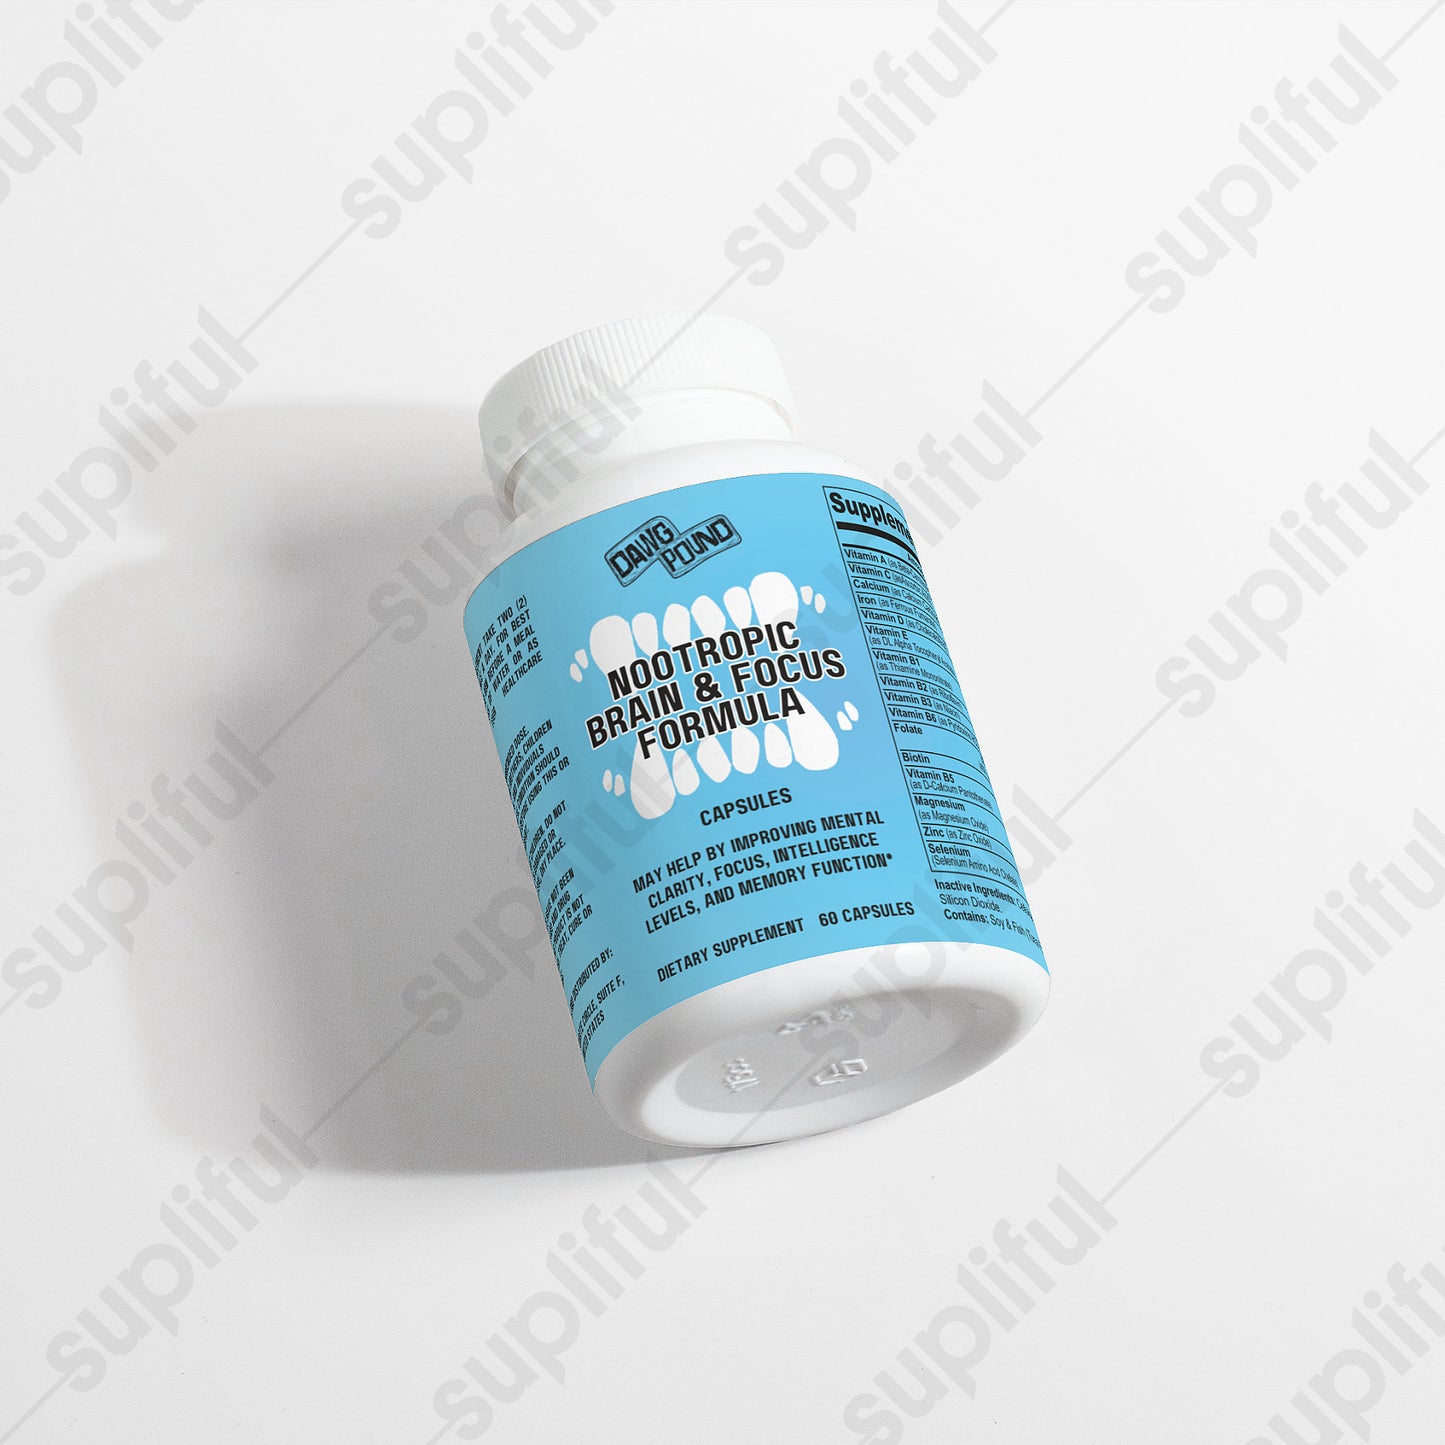 Dawg Pound Nootropic Brain & Focus Formula Supplement Capsules - Tilted Front View